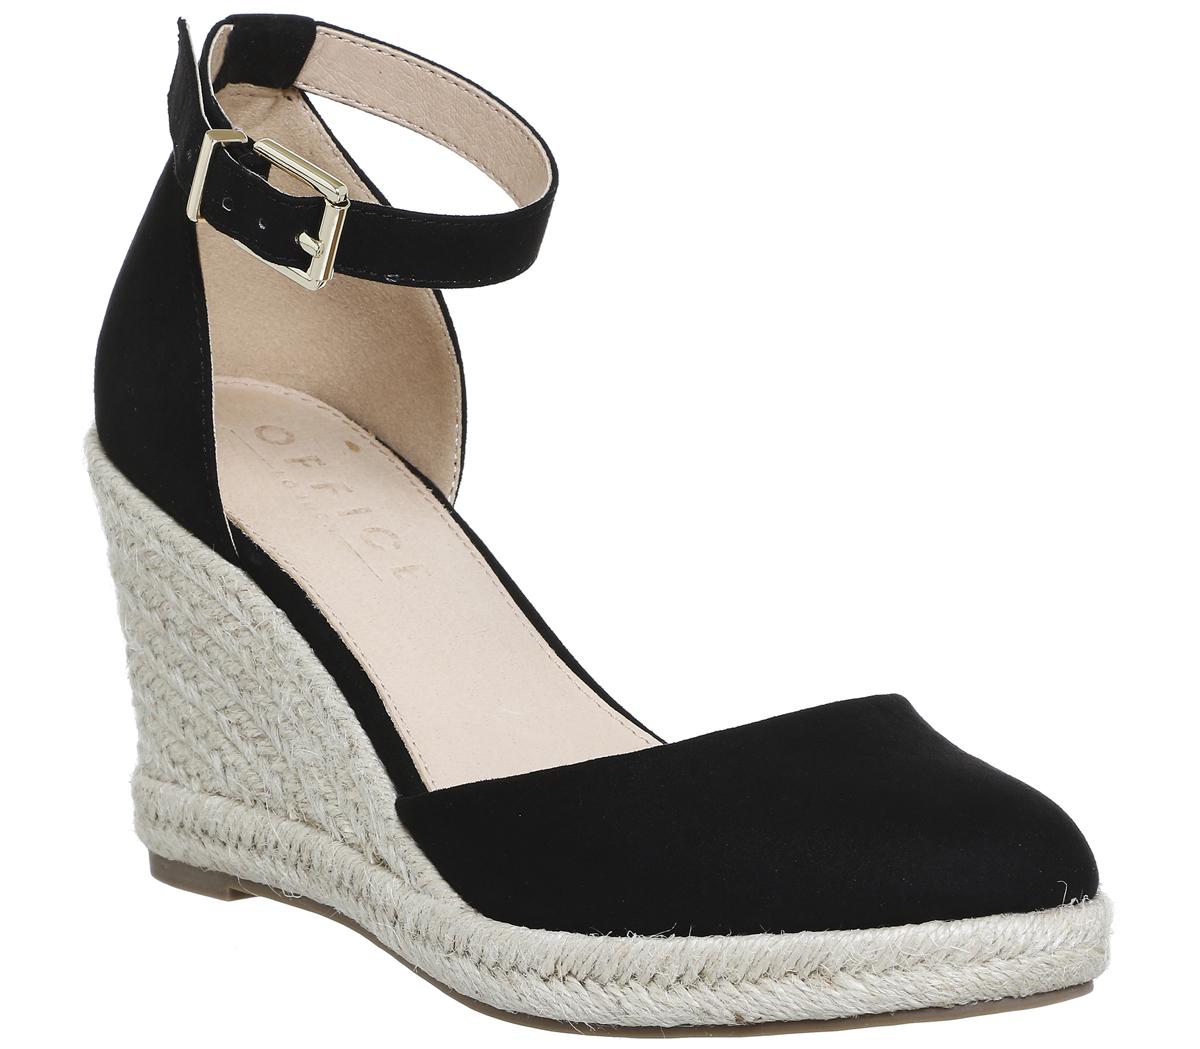 Office Leather Marsha Closed Toe Espadrille Wedges in Black - Lyst